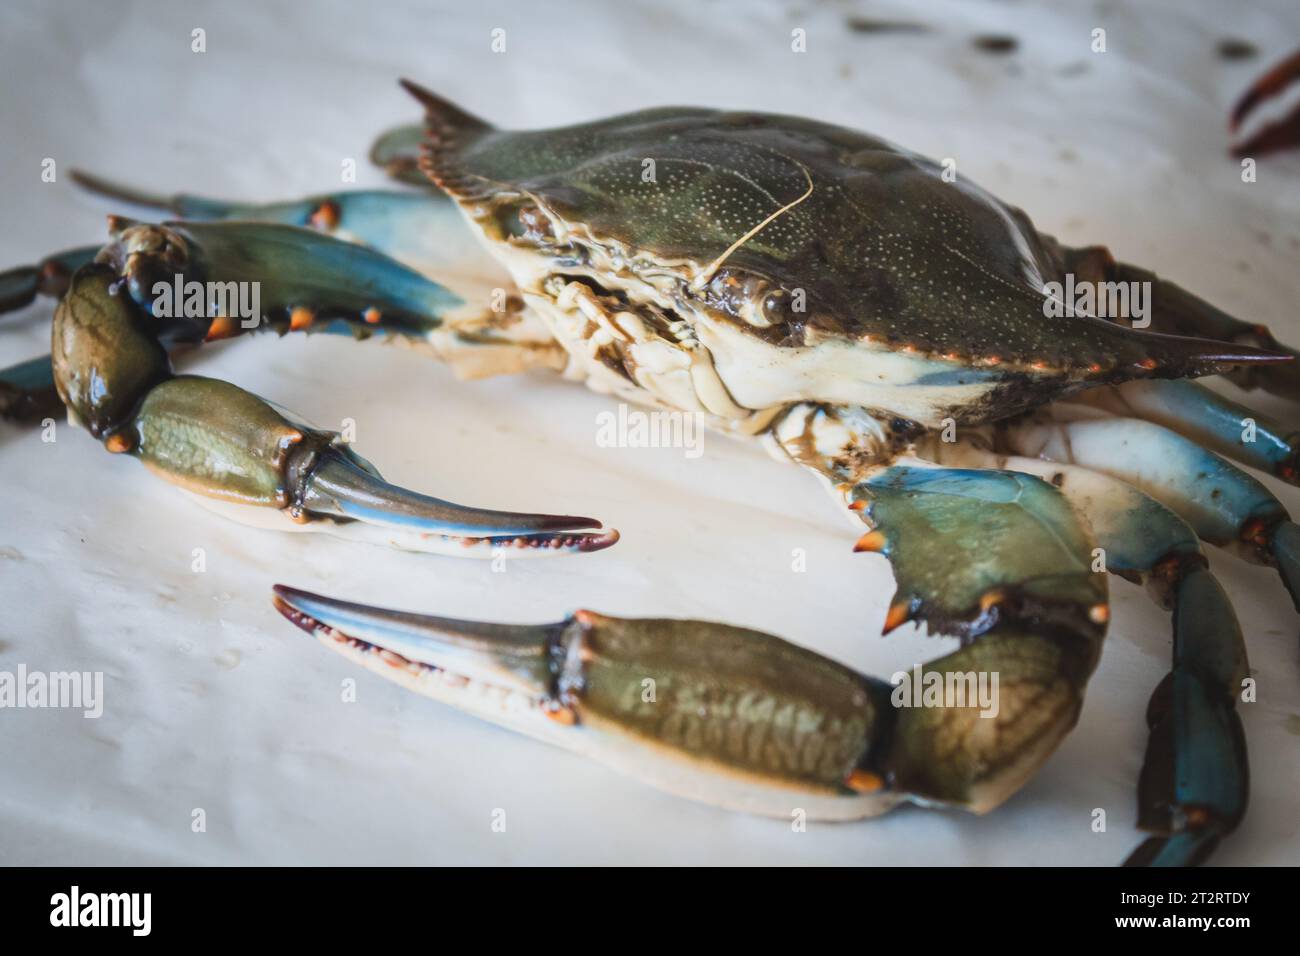 Callinectes sapidus, blue crab, invasive species of crab native to the waters of the western Atlantic Ocean and the Gulf of Mexico in a fish market Stock Photo